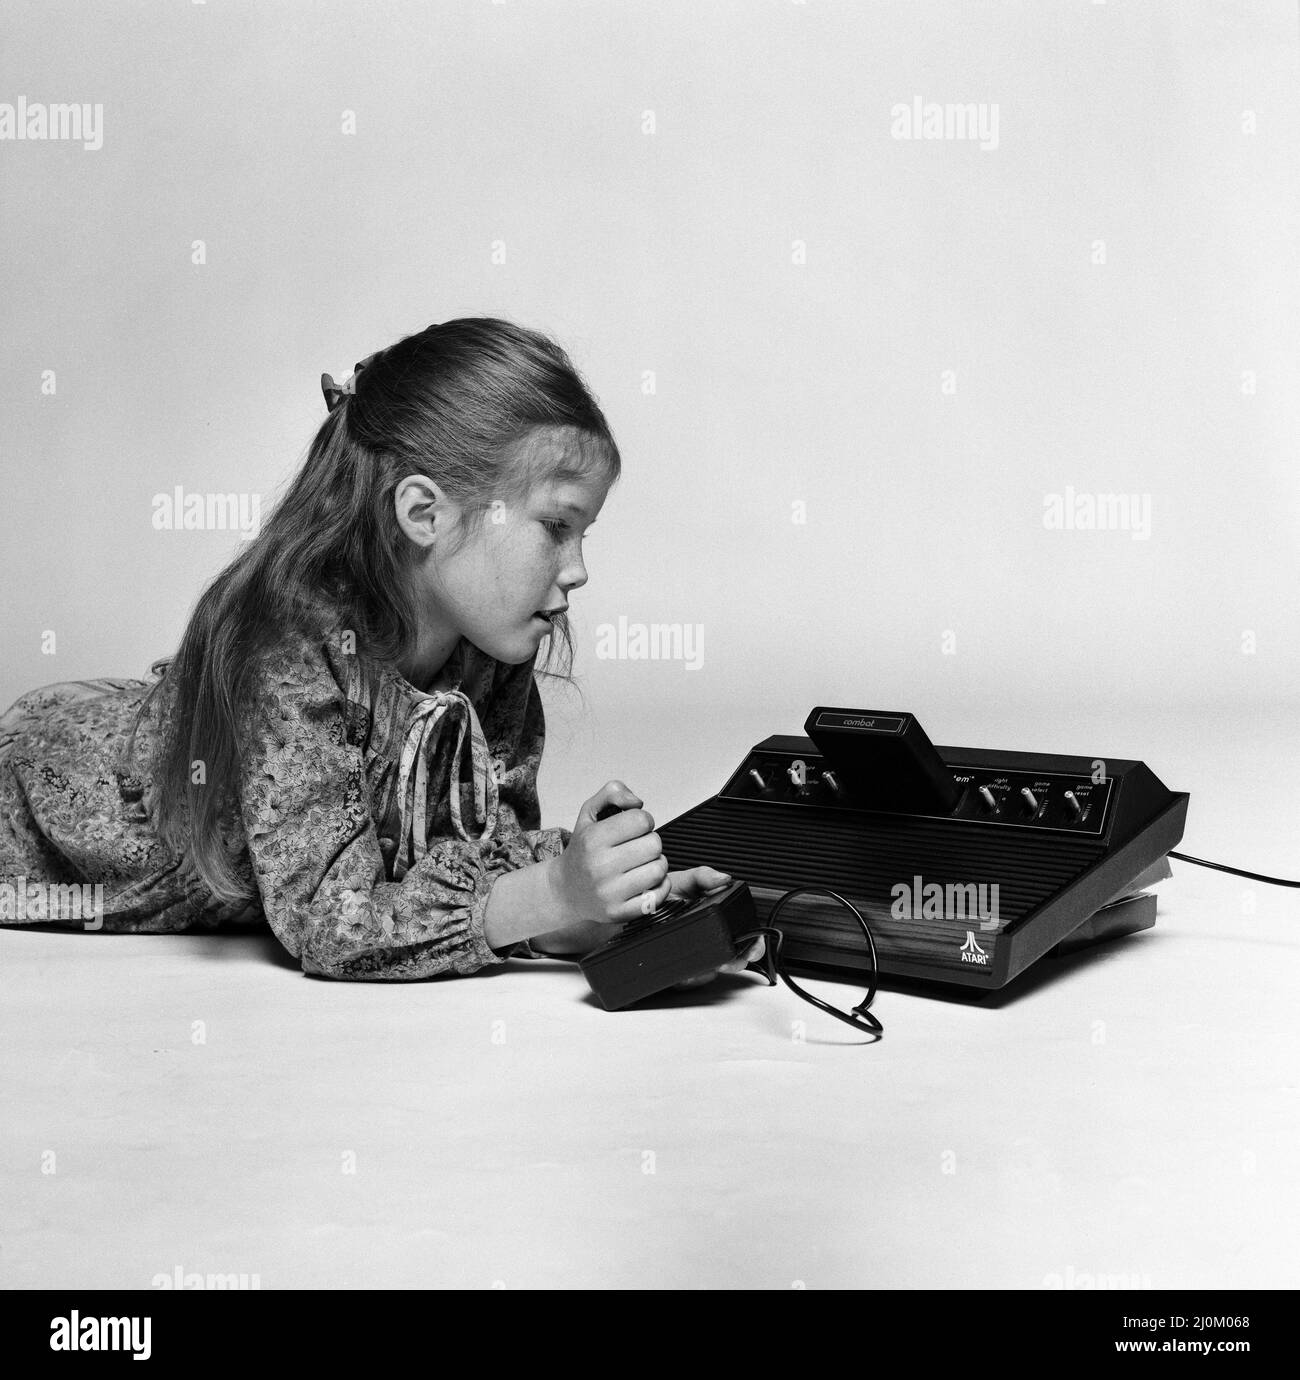 A young girl playing on the Atari 2600, a home video game console by Atari. December 1980. Stock Photo